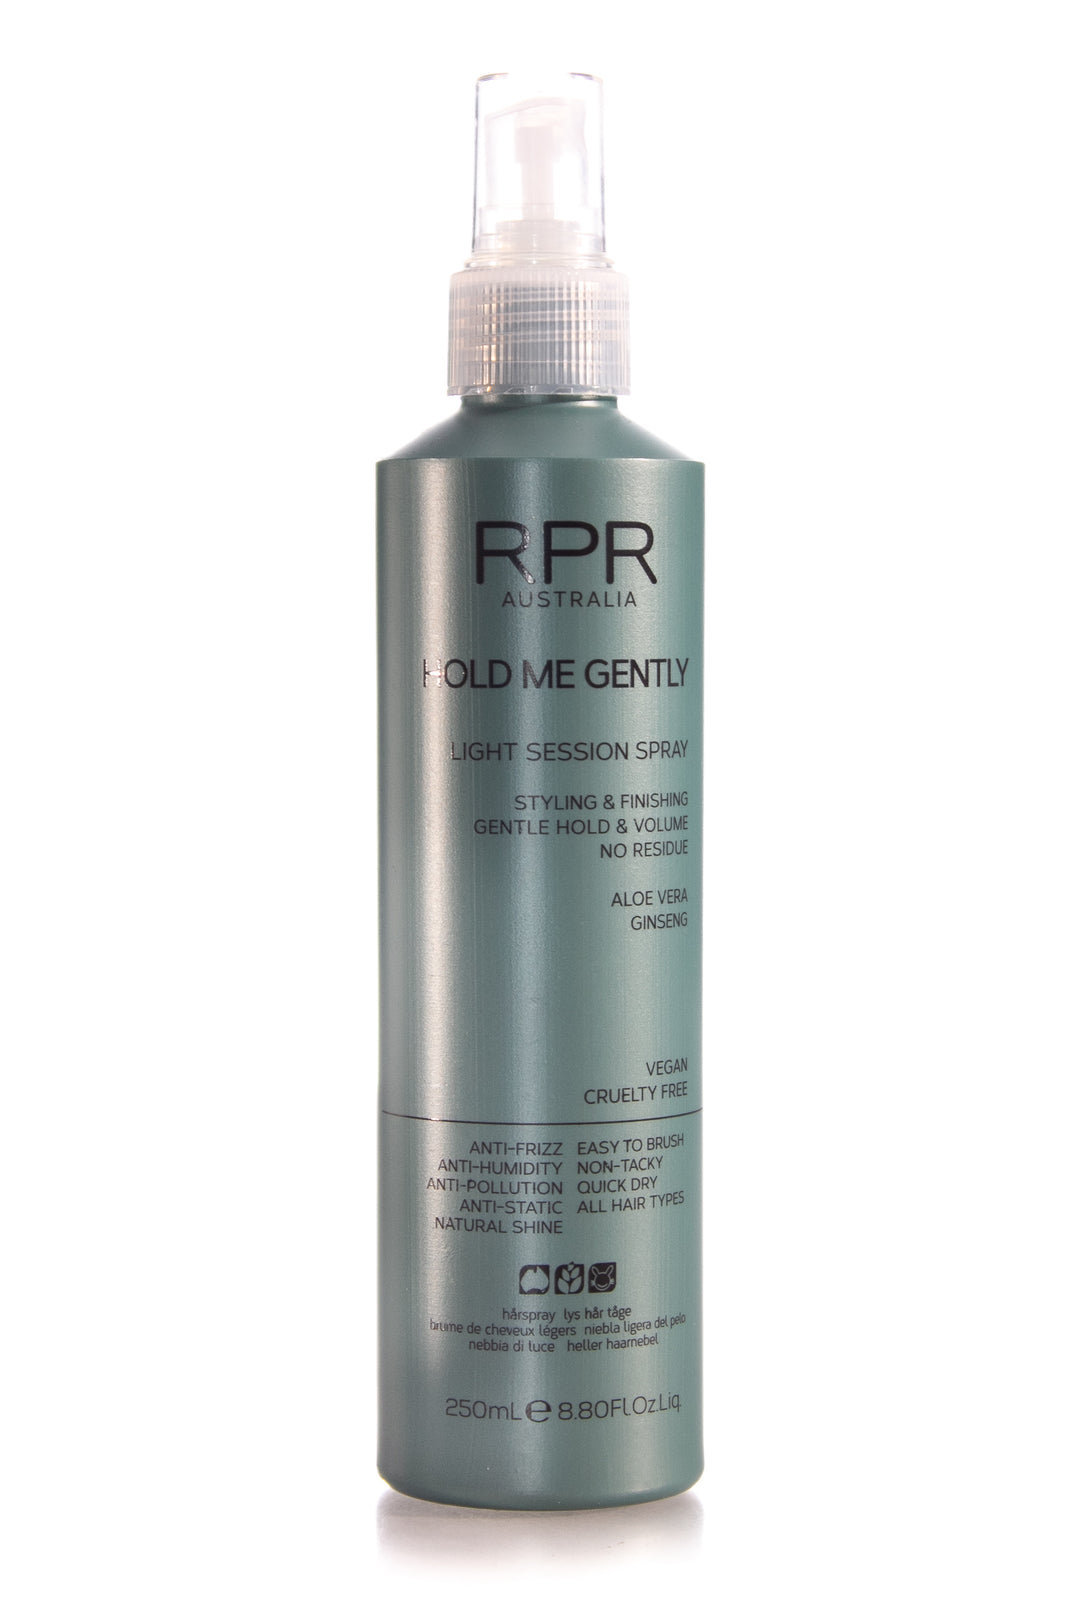 rpr-hold-me-gently-250ml